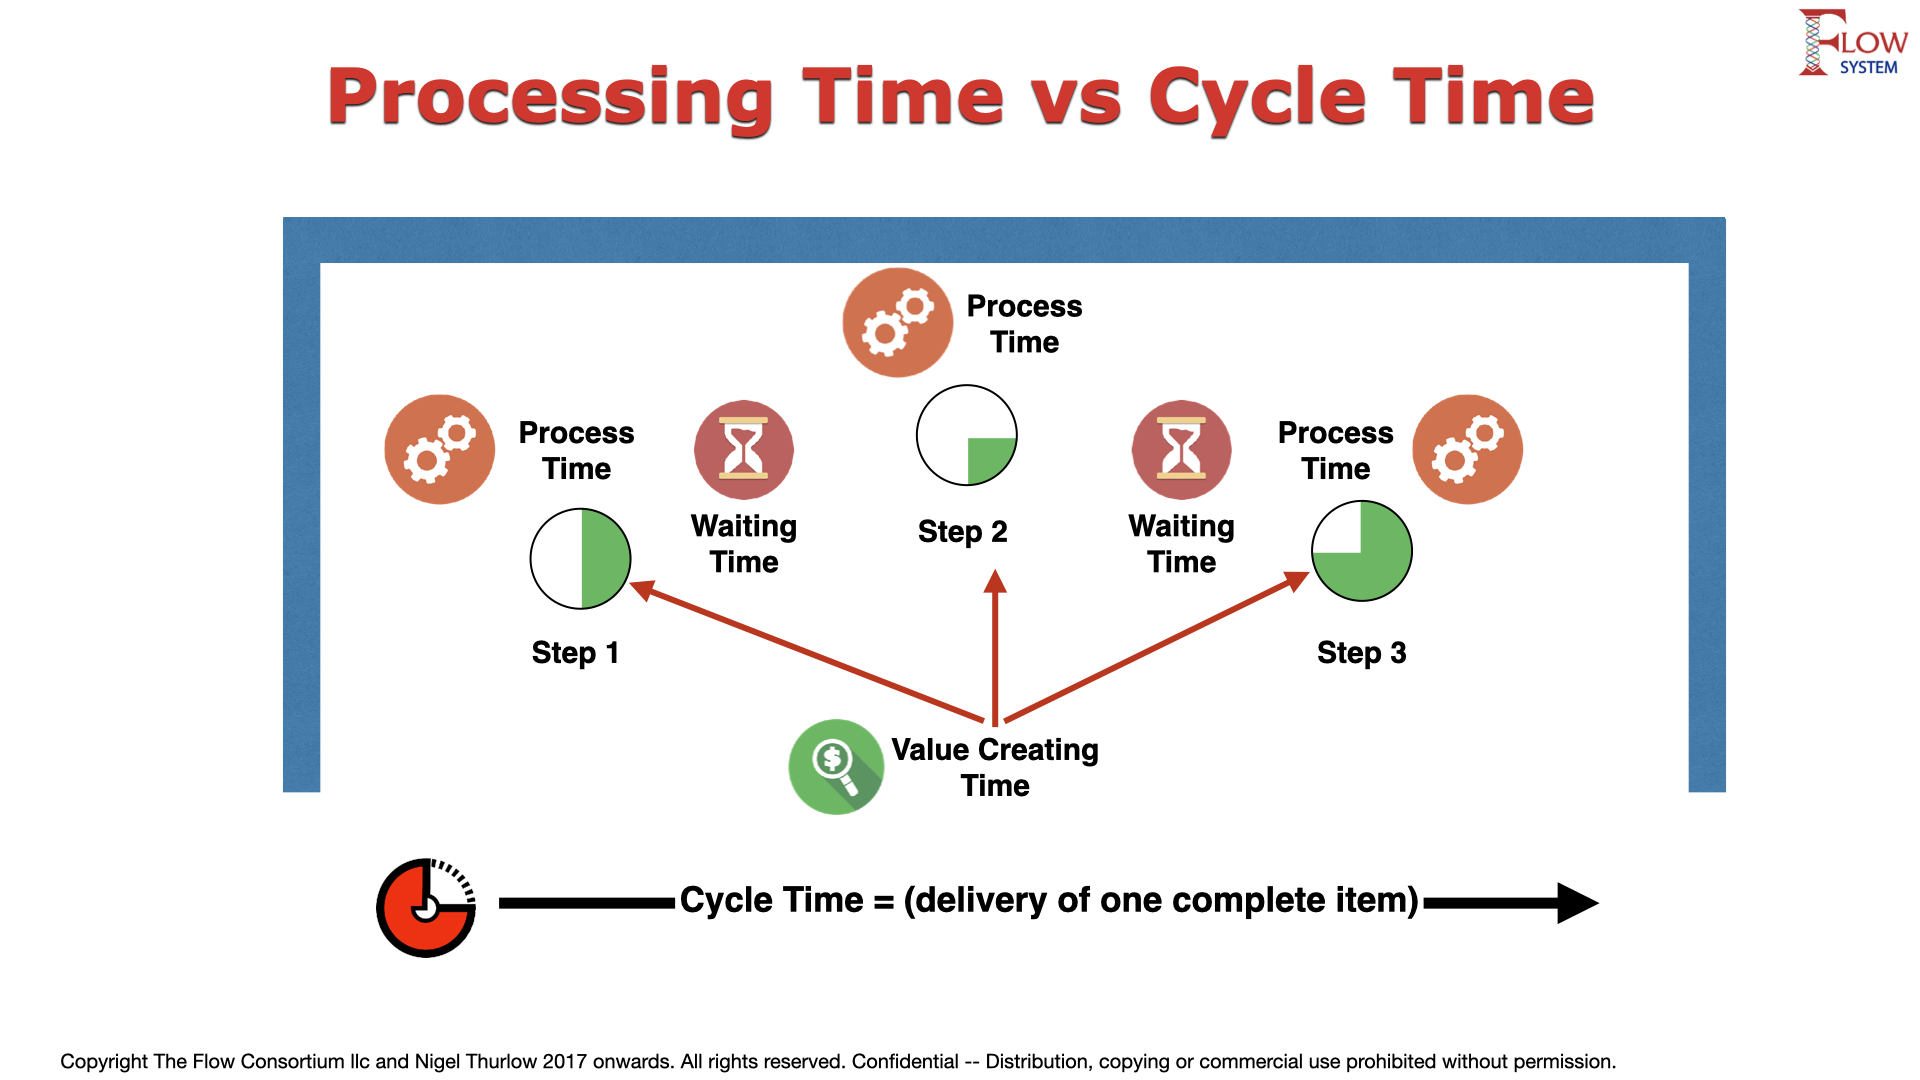 Image showing Process Time vs Cycle Time